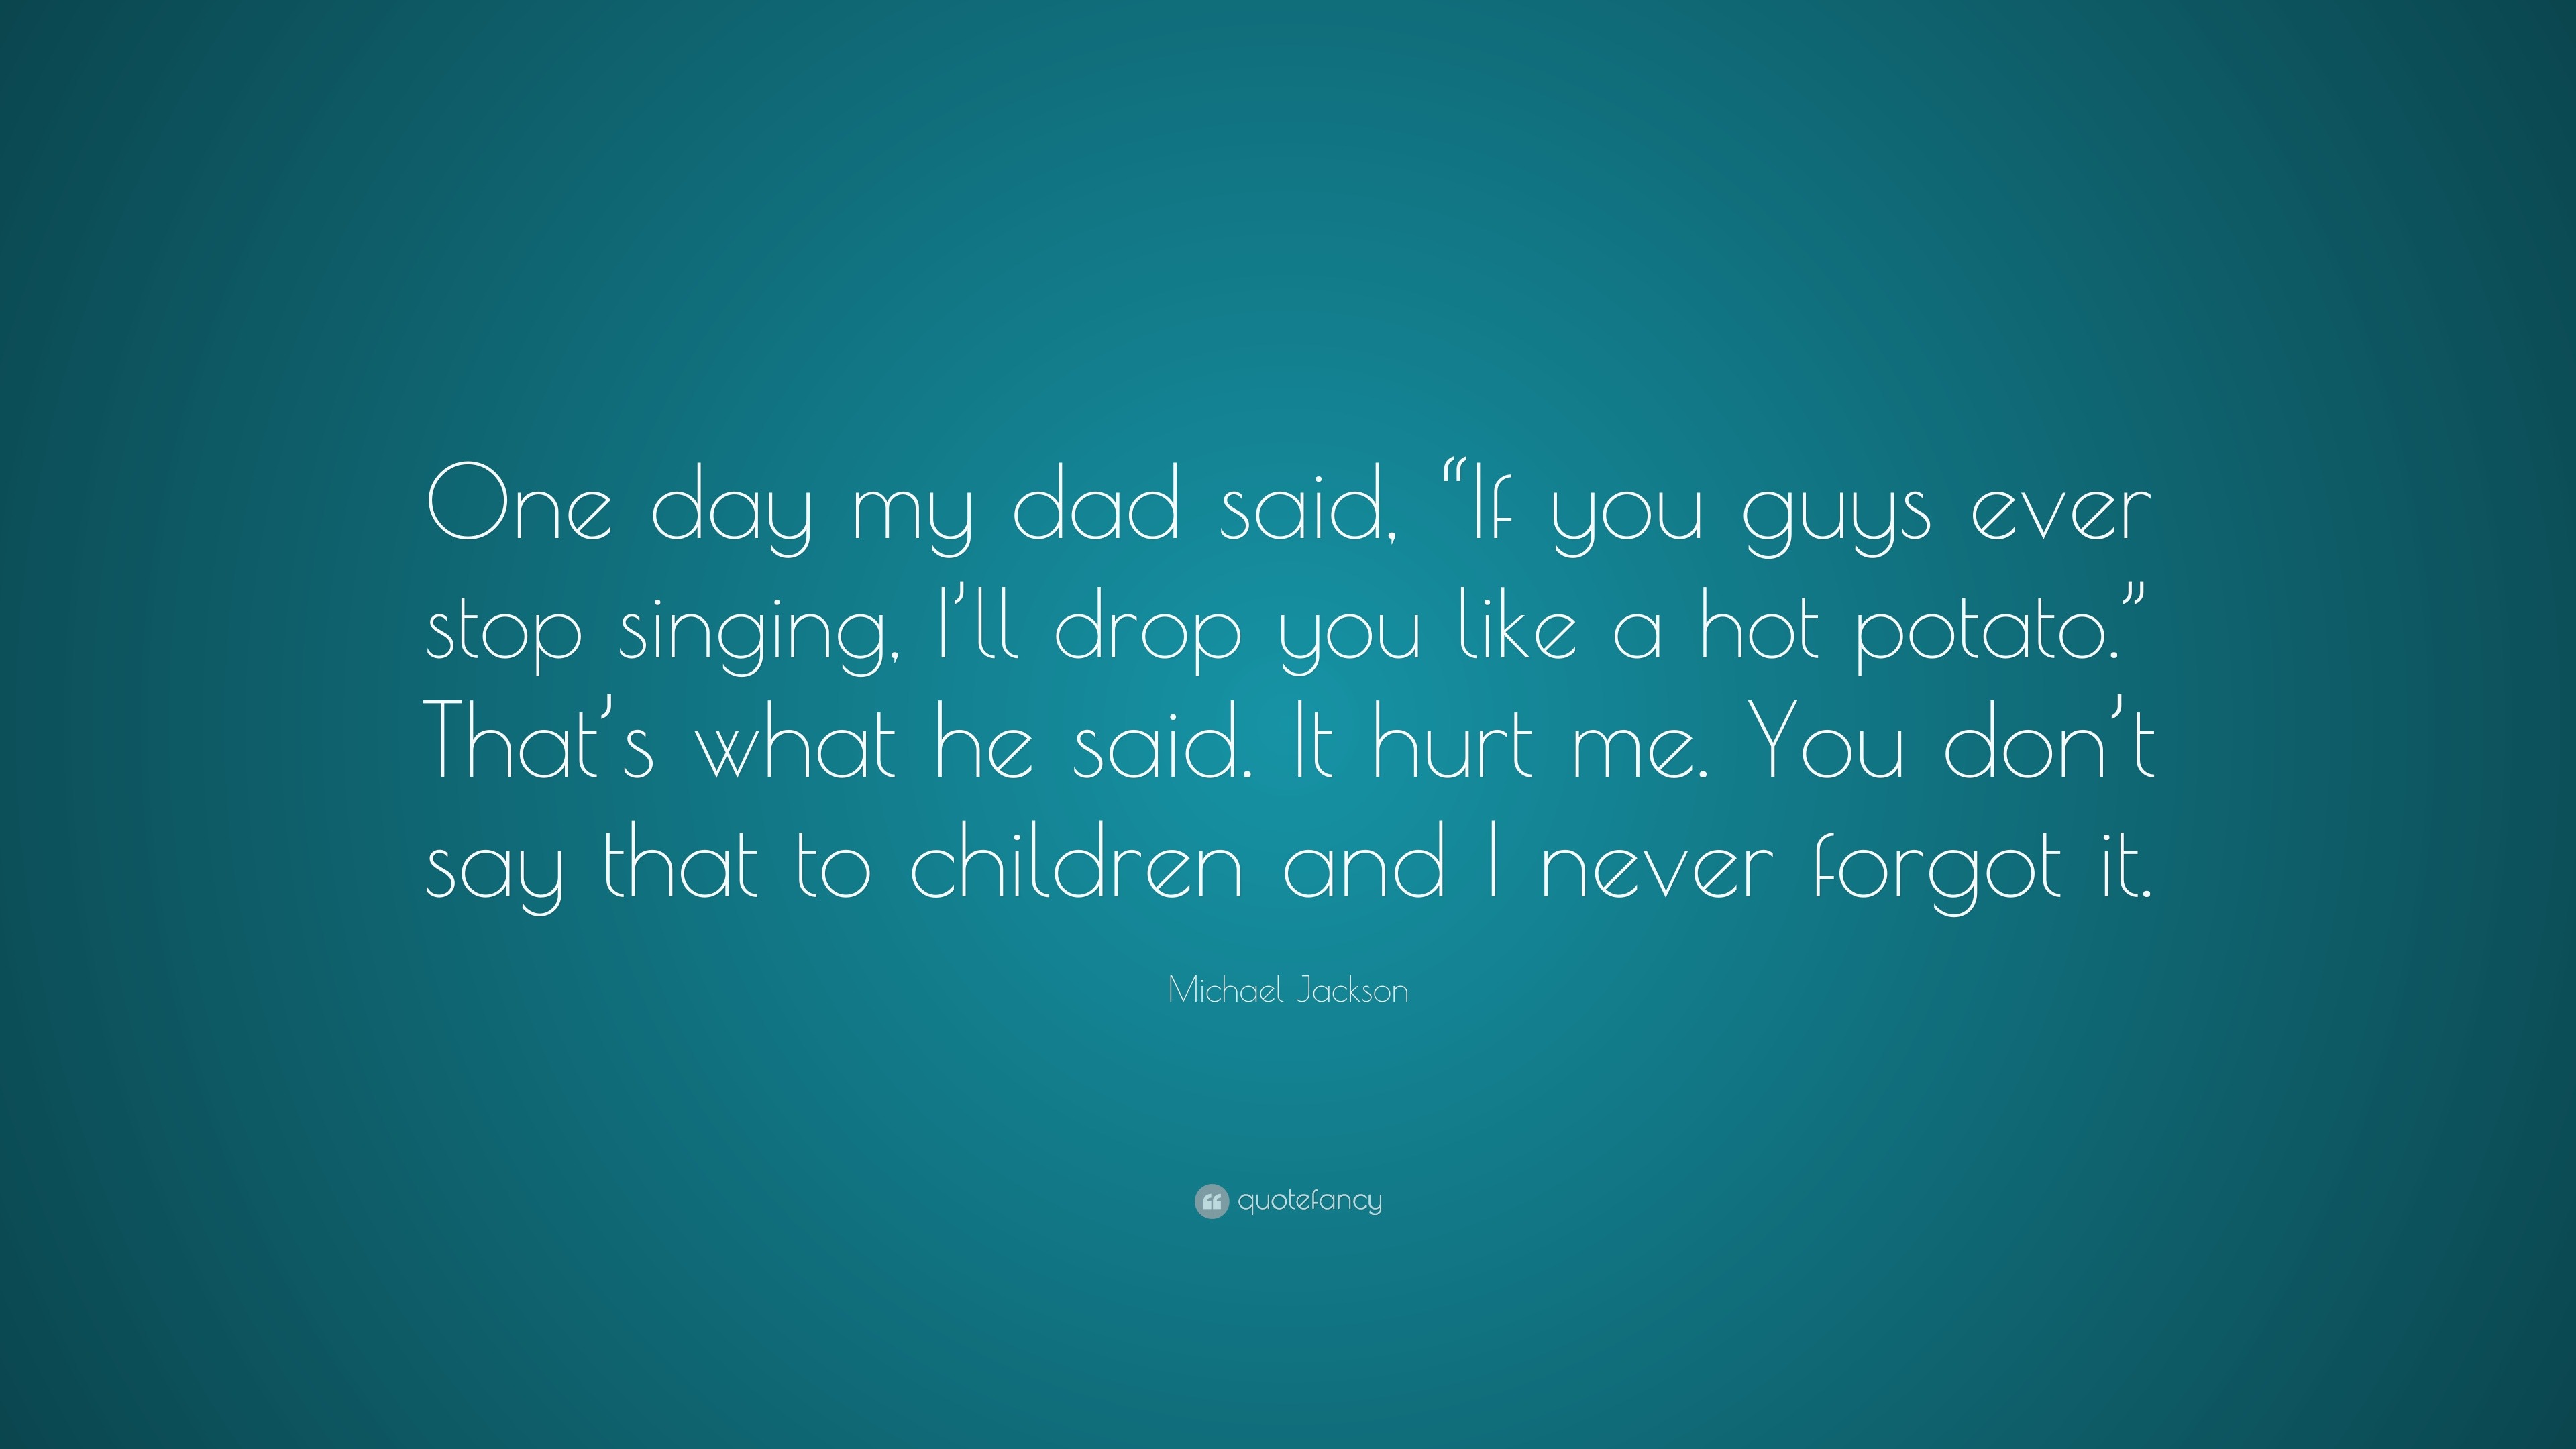 Michael Jackson Quote: “One day my dad said, “If you guys ever stop